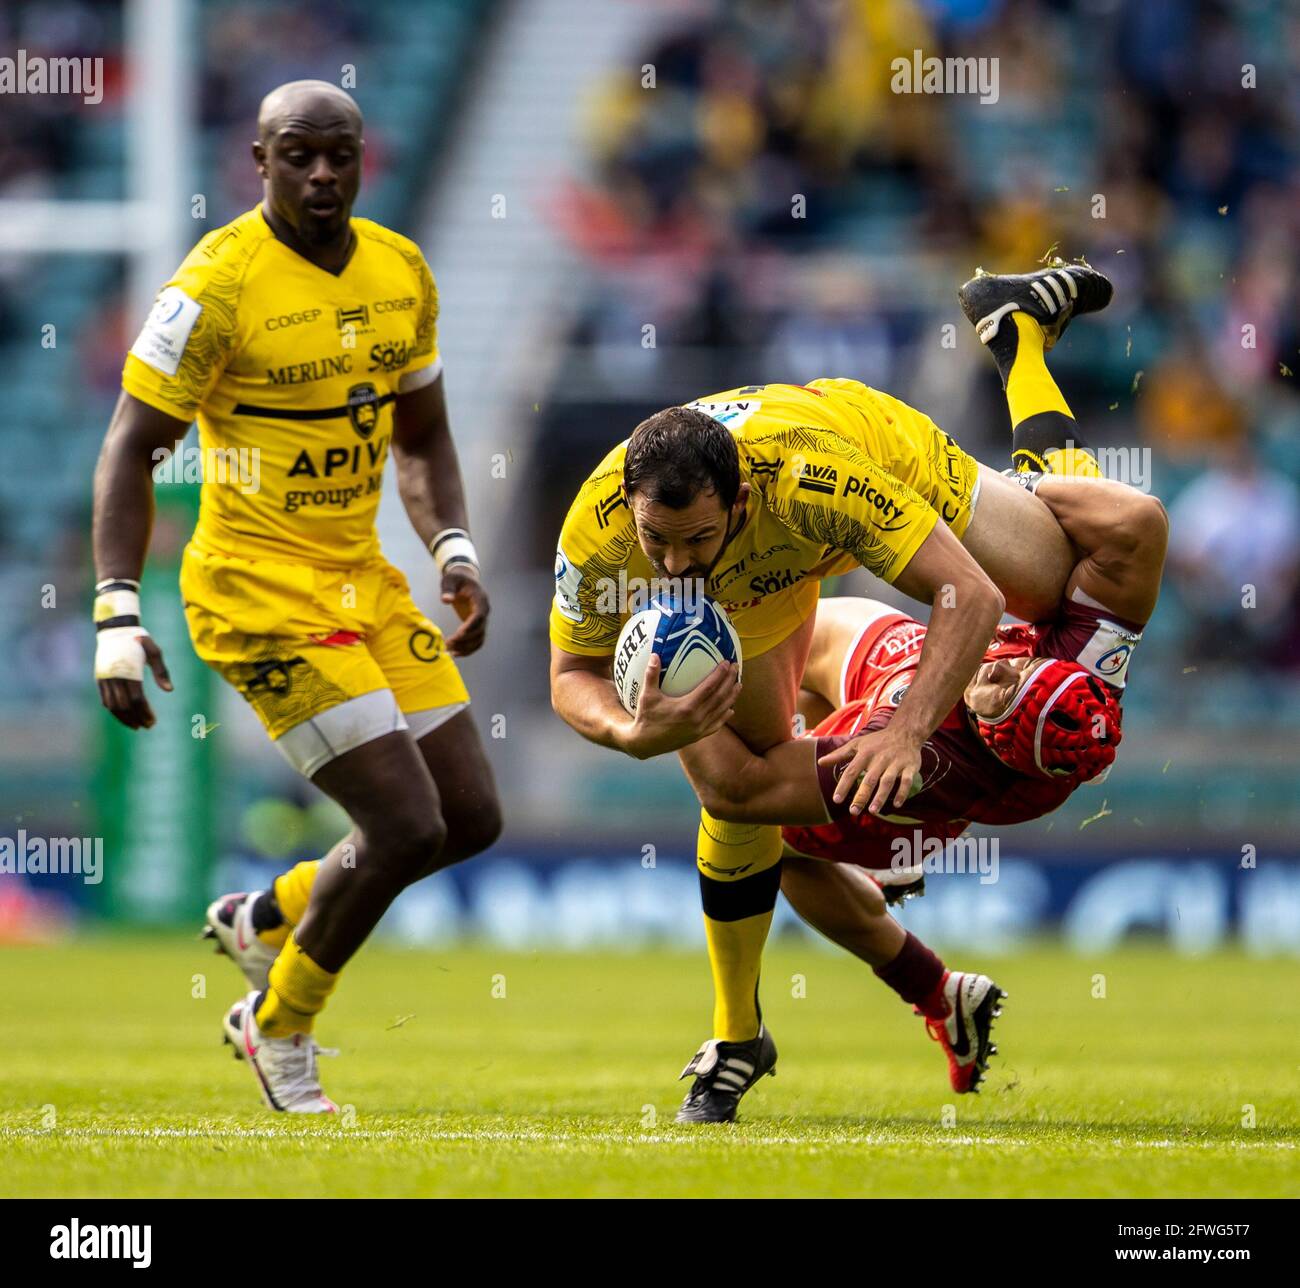 Twickenham London Uk 22nd May 21 European Rugby Champions Cup Final La Rochelle Versus Toulouse Geoffrey Doumayrou Of La Rochelle Is Tackled By Cheslin Kolbe Of Toulouse Credit Action Plus Sports Alamy Live